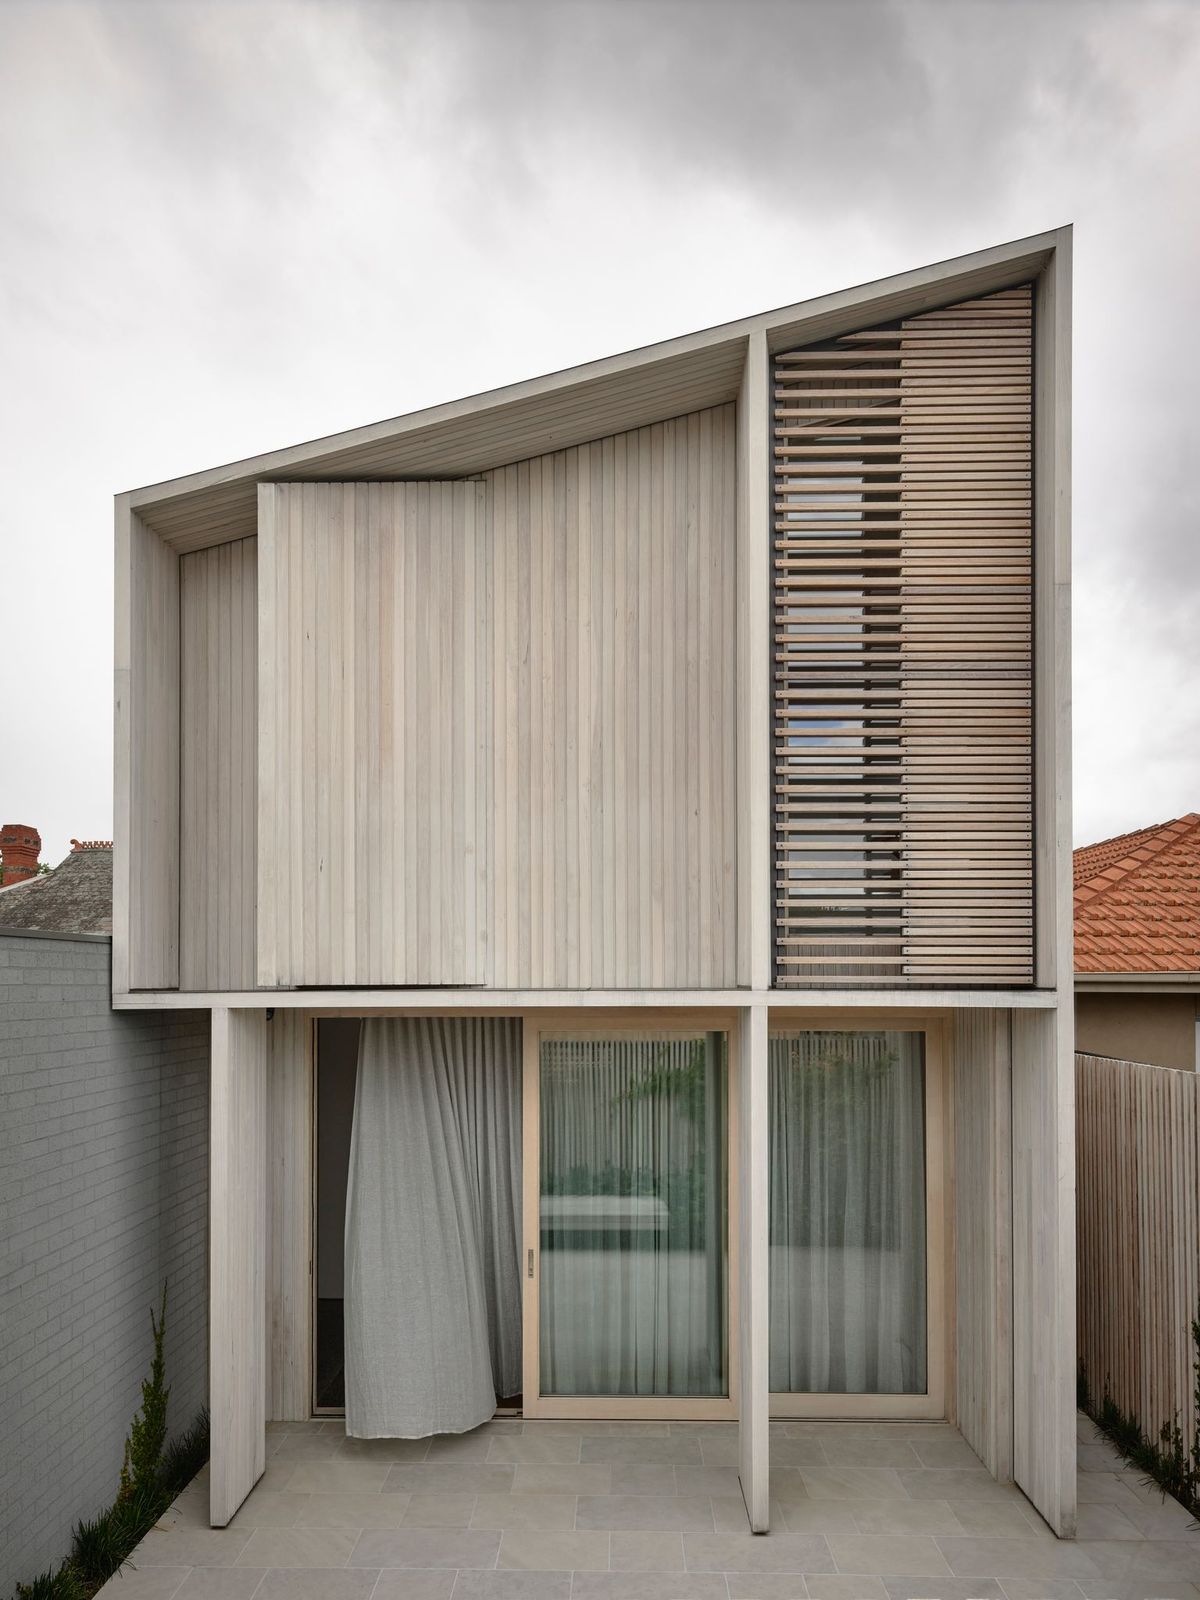 Silvertop House by Tom Robertson Architects. Exterior rear facade shrouded in silvertop ash cladding